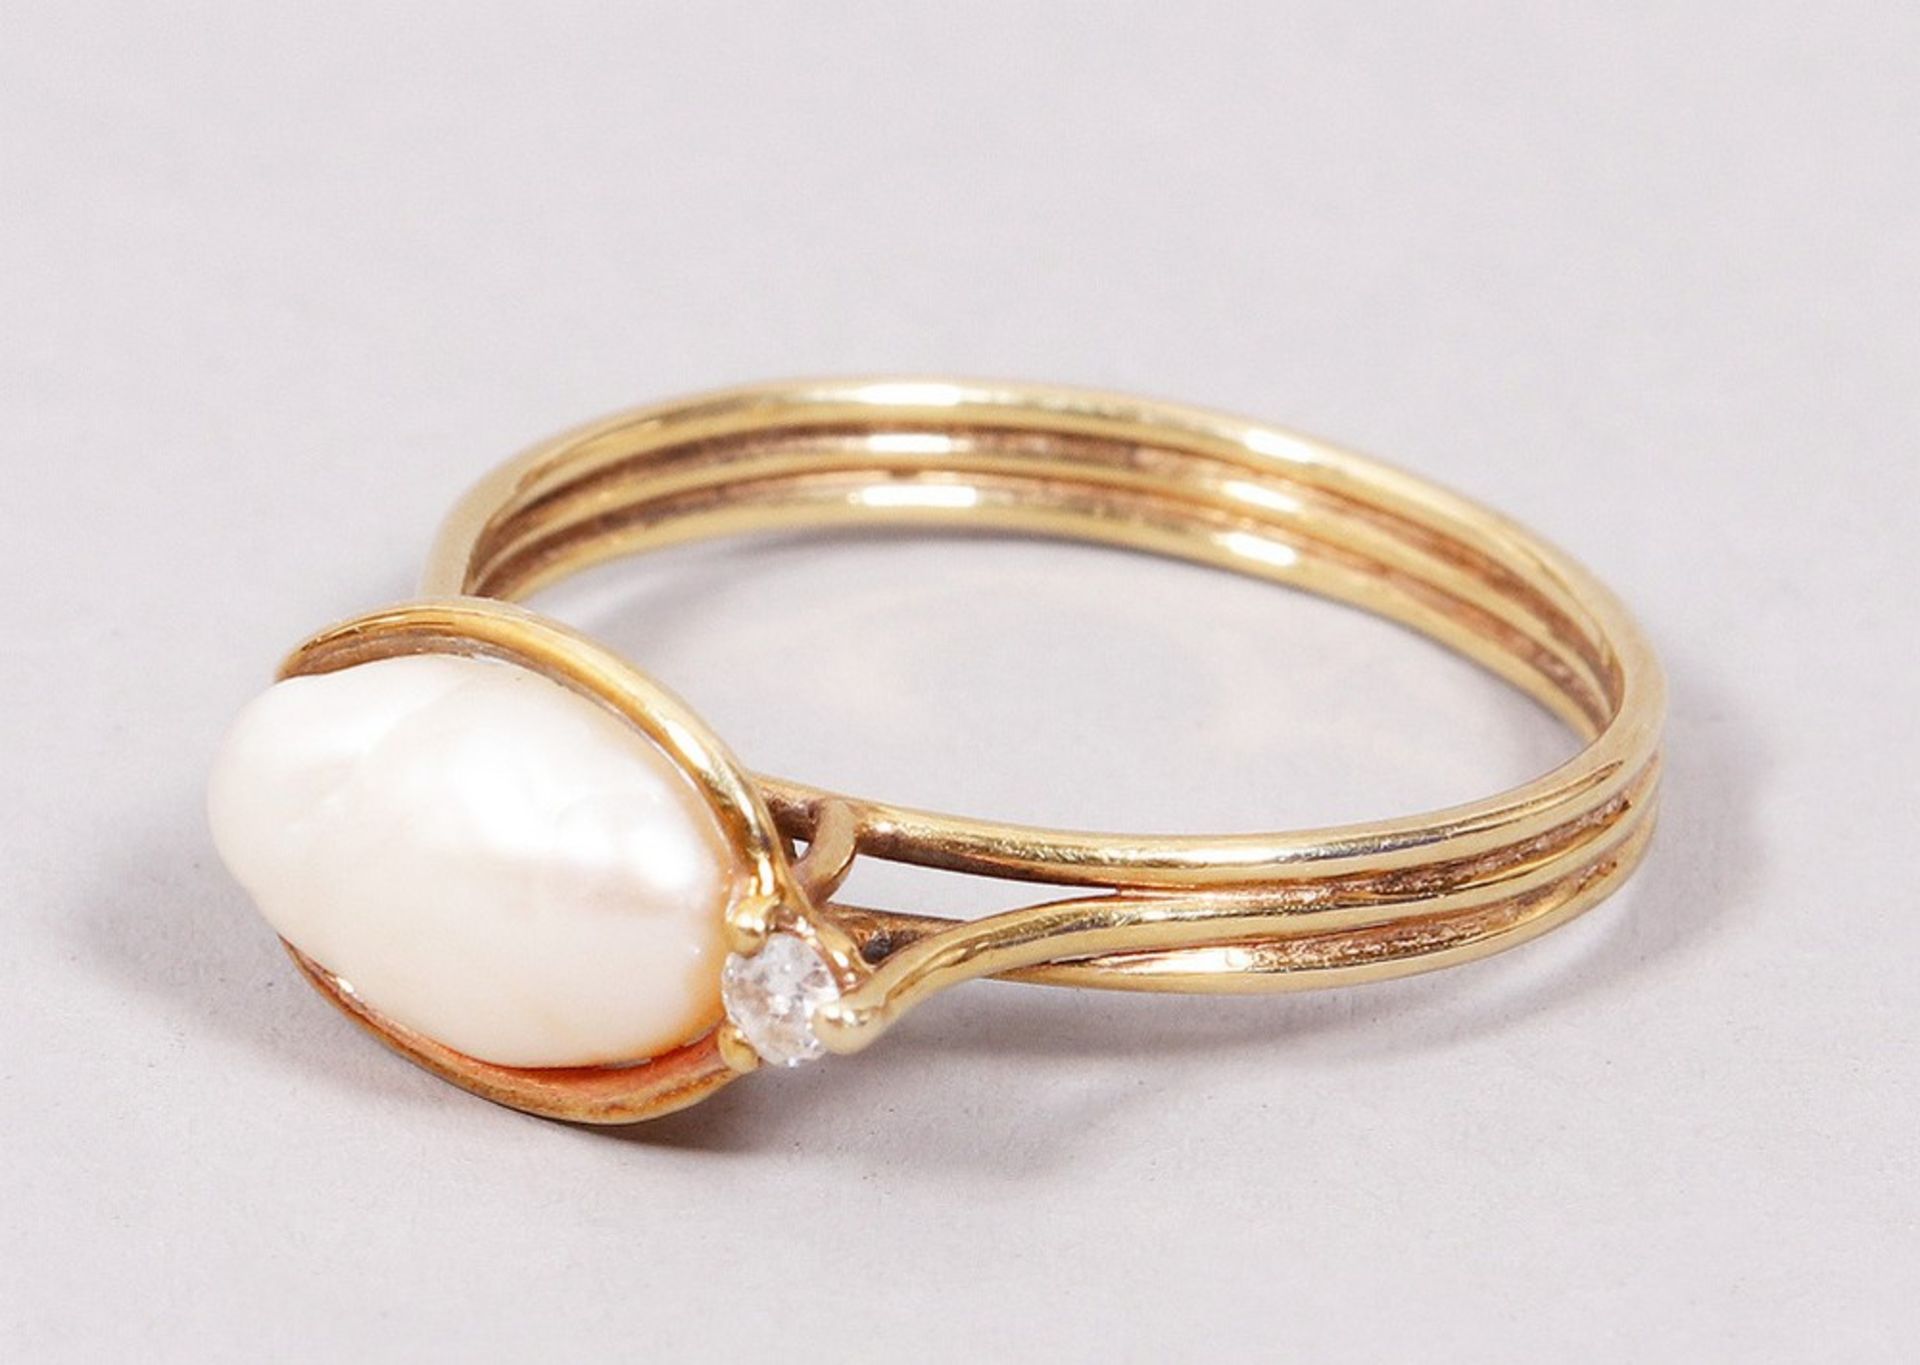 Pearl ring, 585 yellow gold - Image 3 of 4